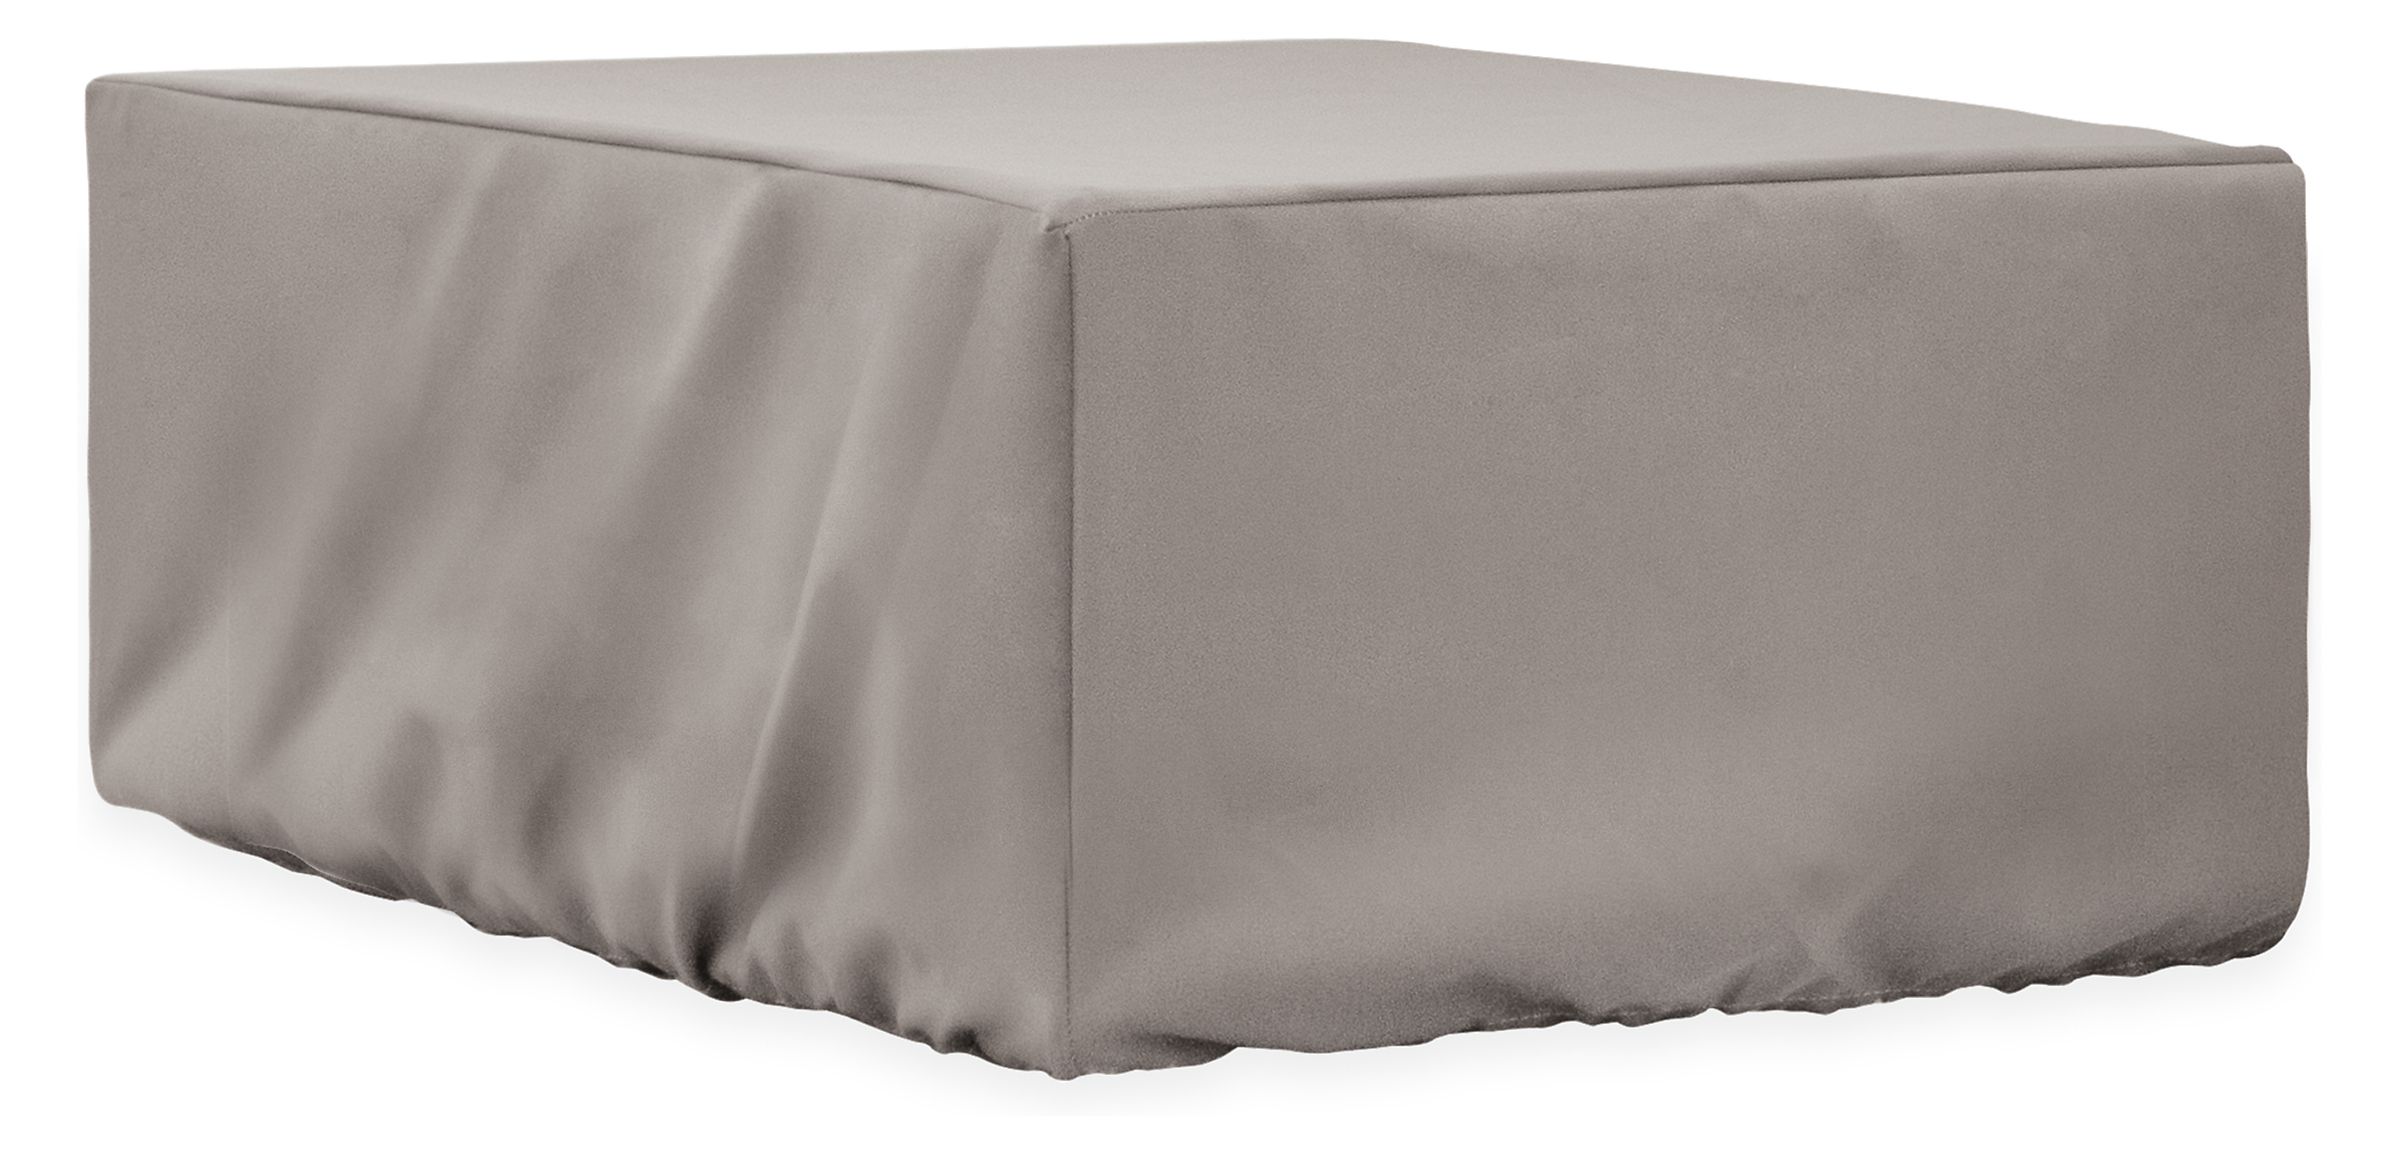 Outdoor Cover for Table/Ottoman/Bench 21w 31d 20h with Drawstring